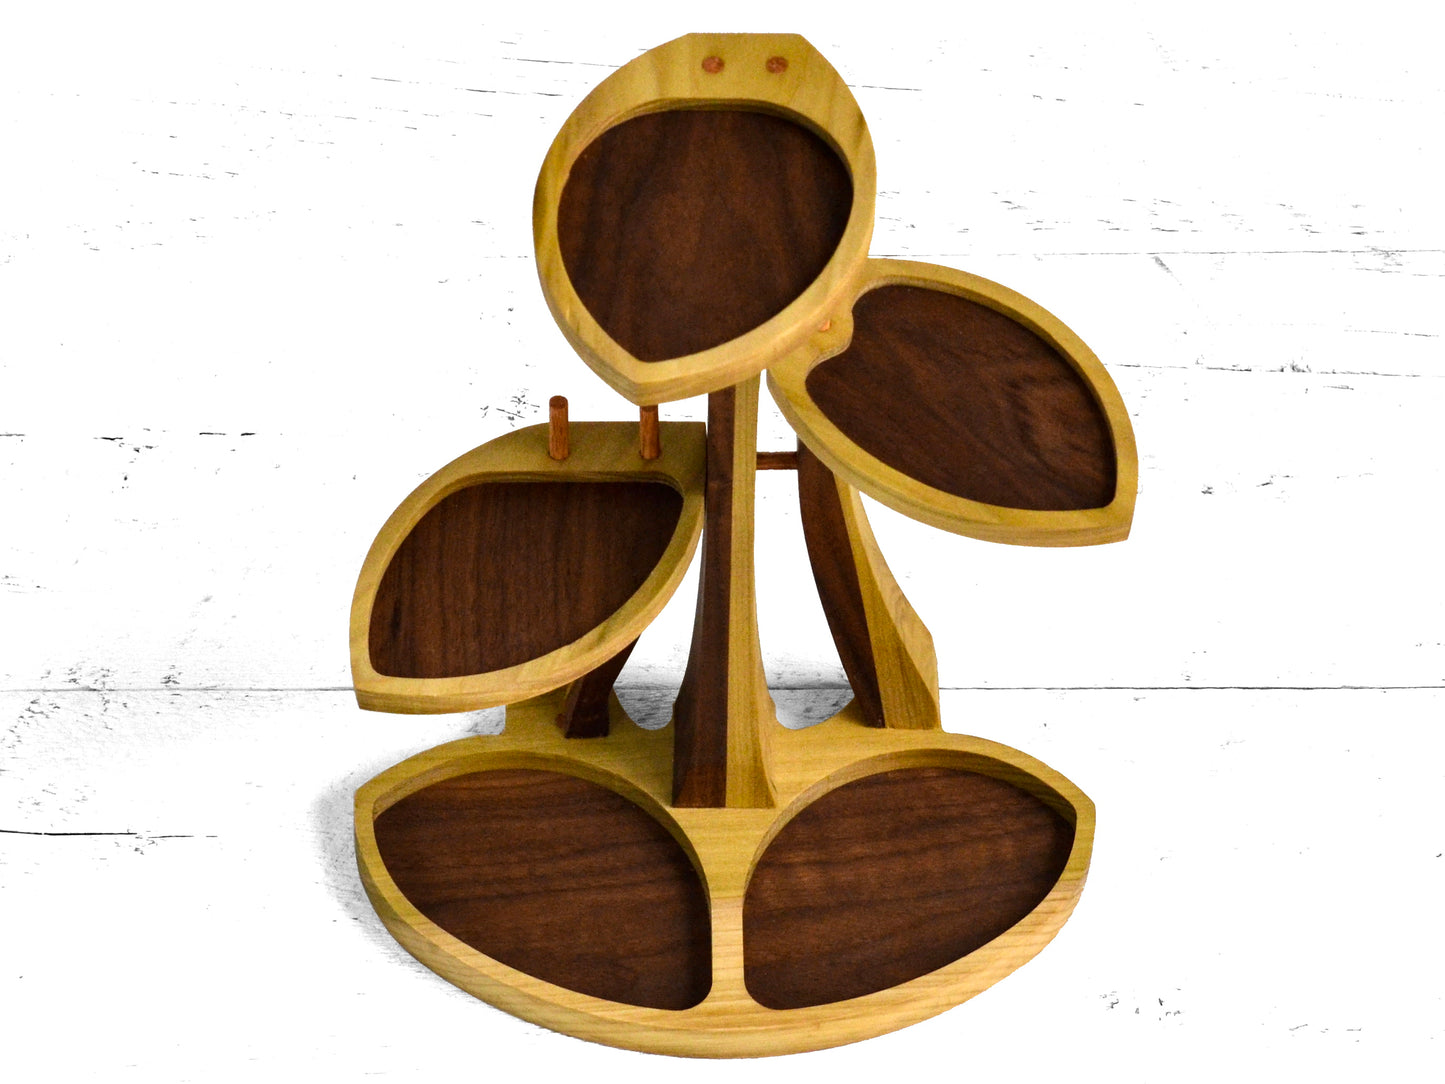 unique tree shaped tray with multiple levels